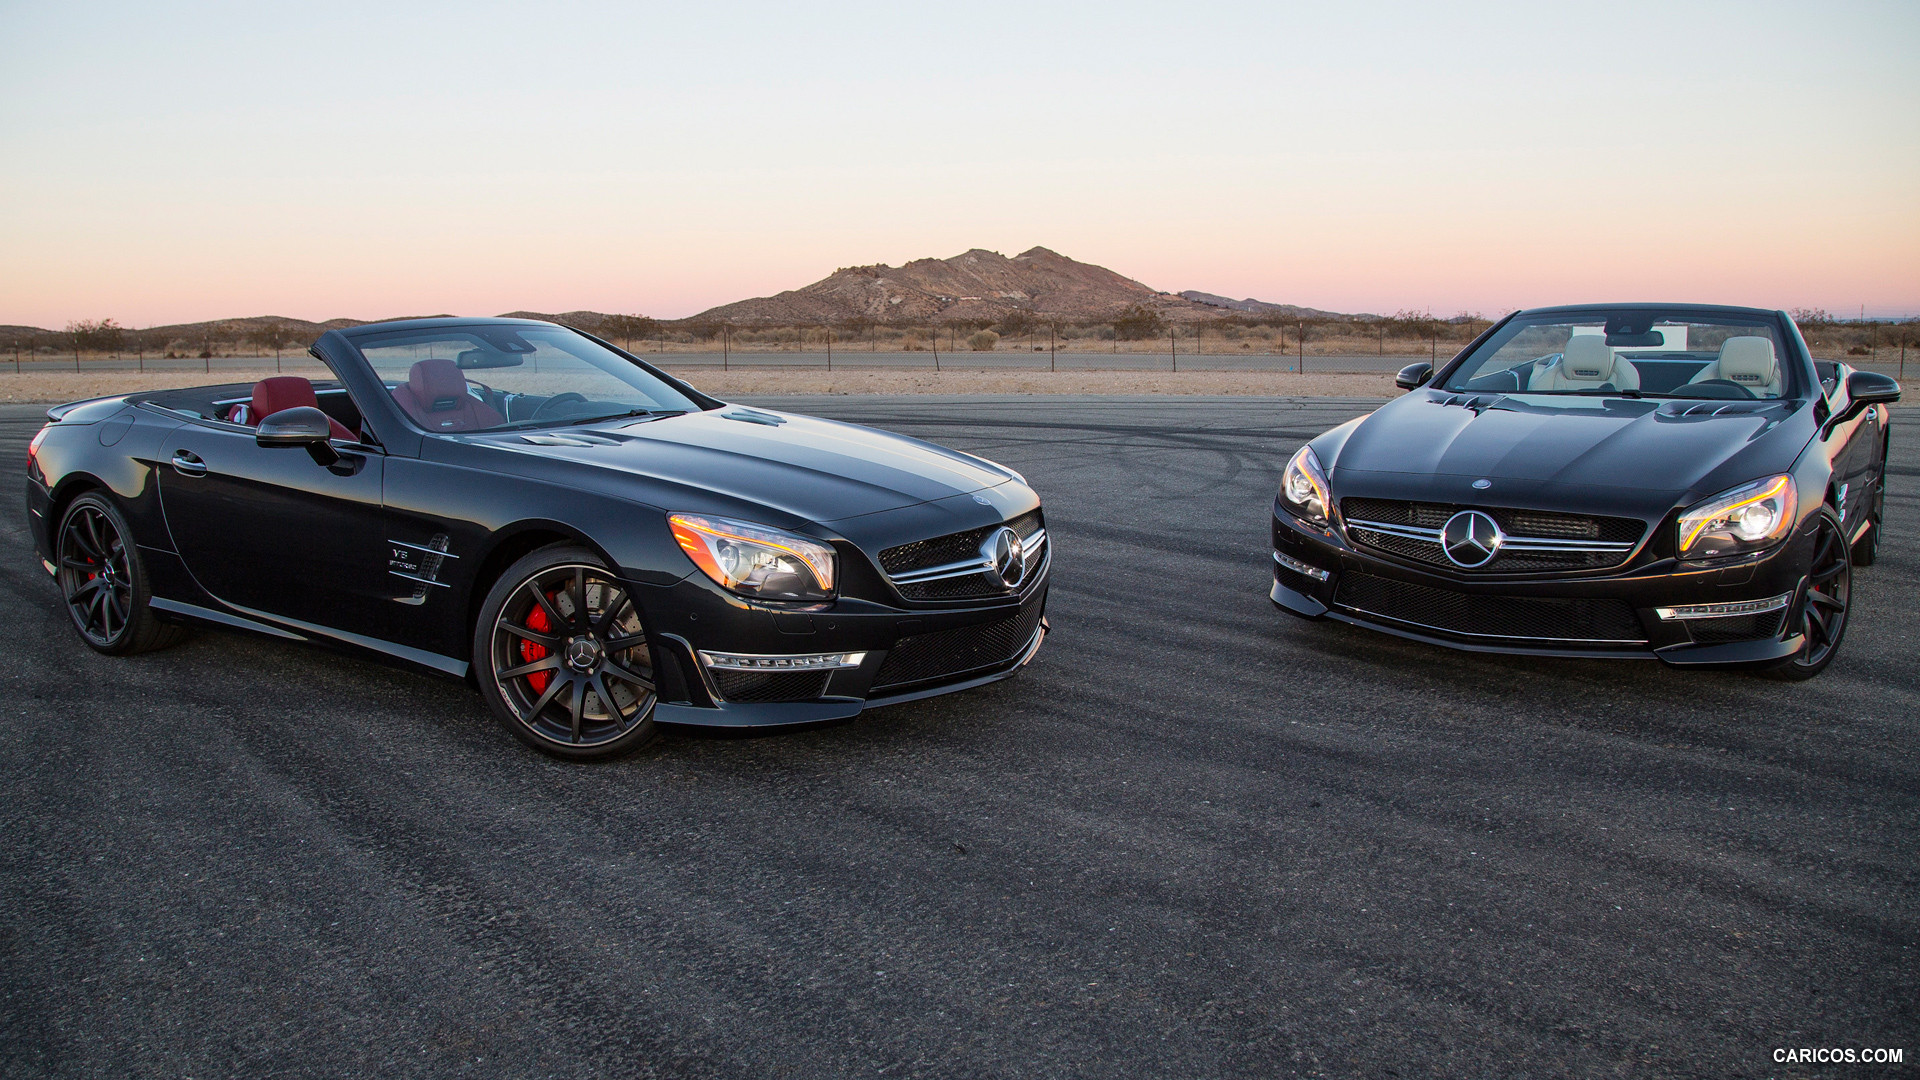 Mercedes-Benz SL63 AMG (2013) Duo - Front, #99 of 111